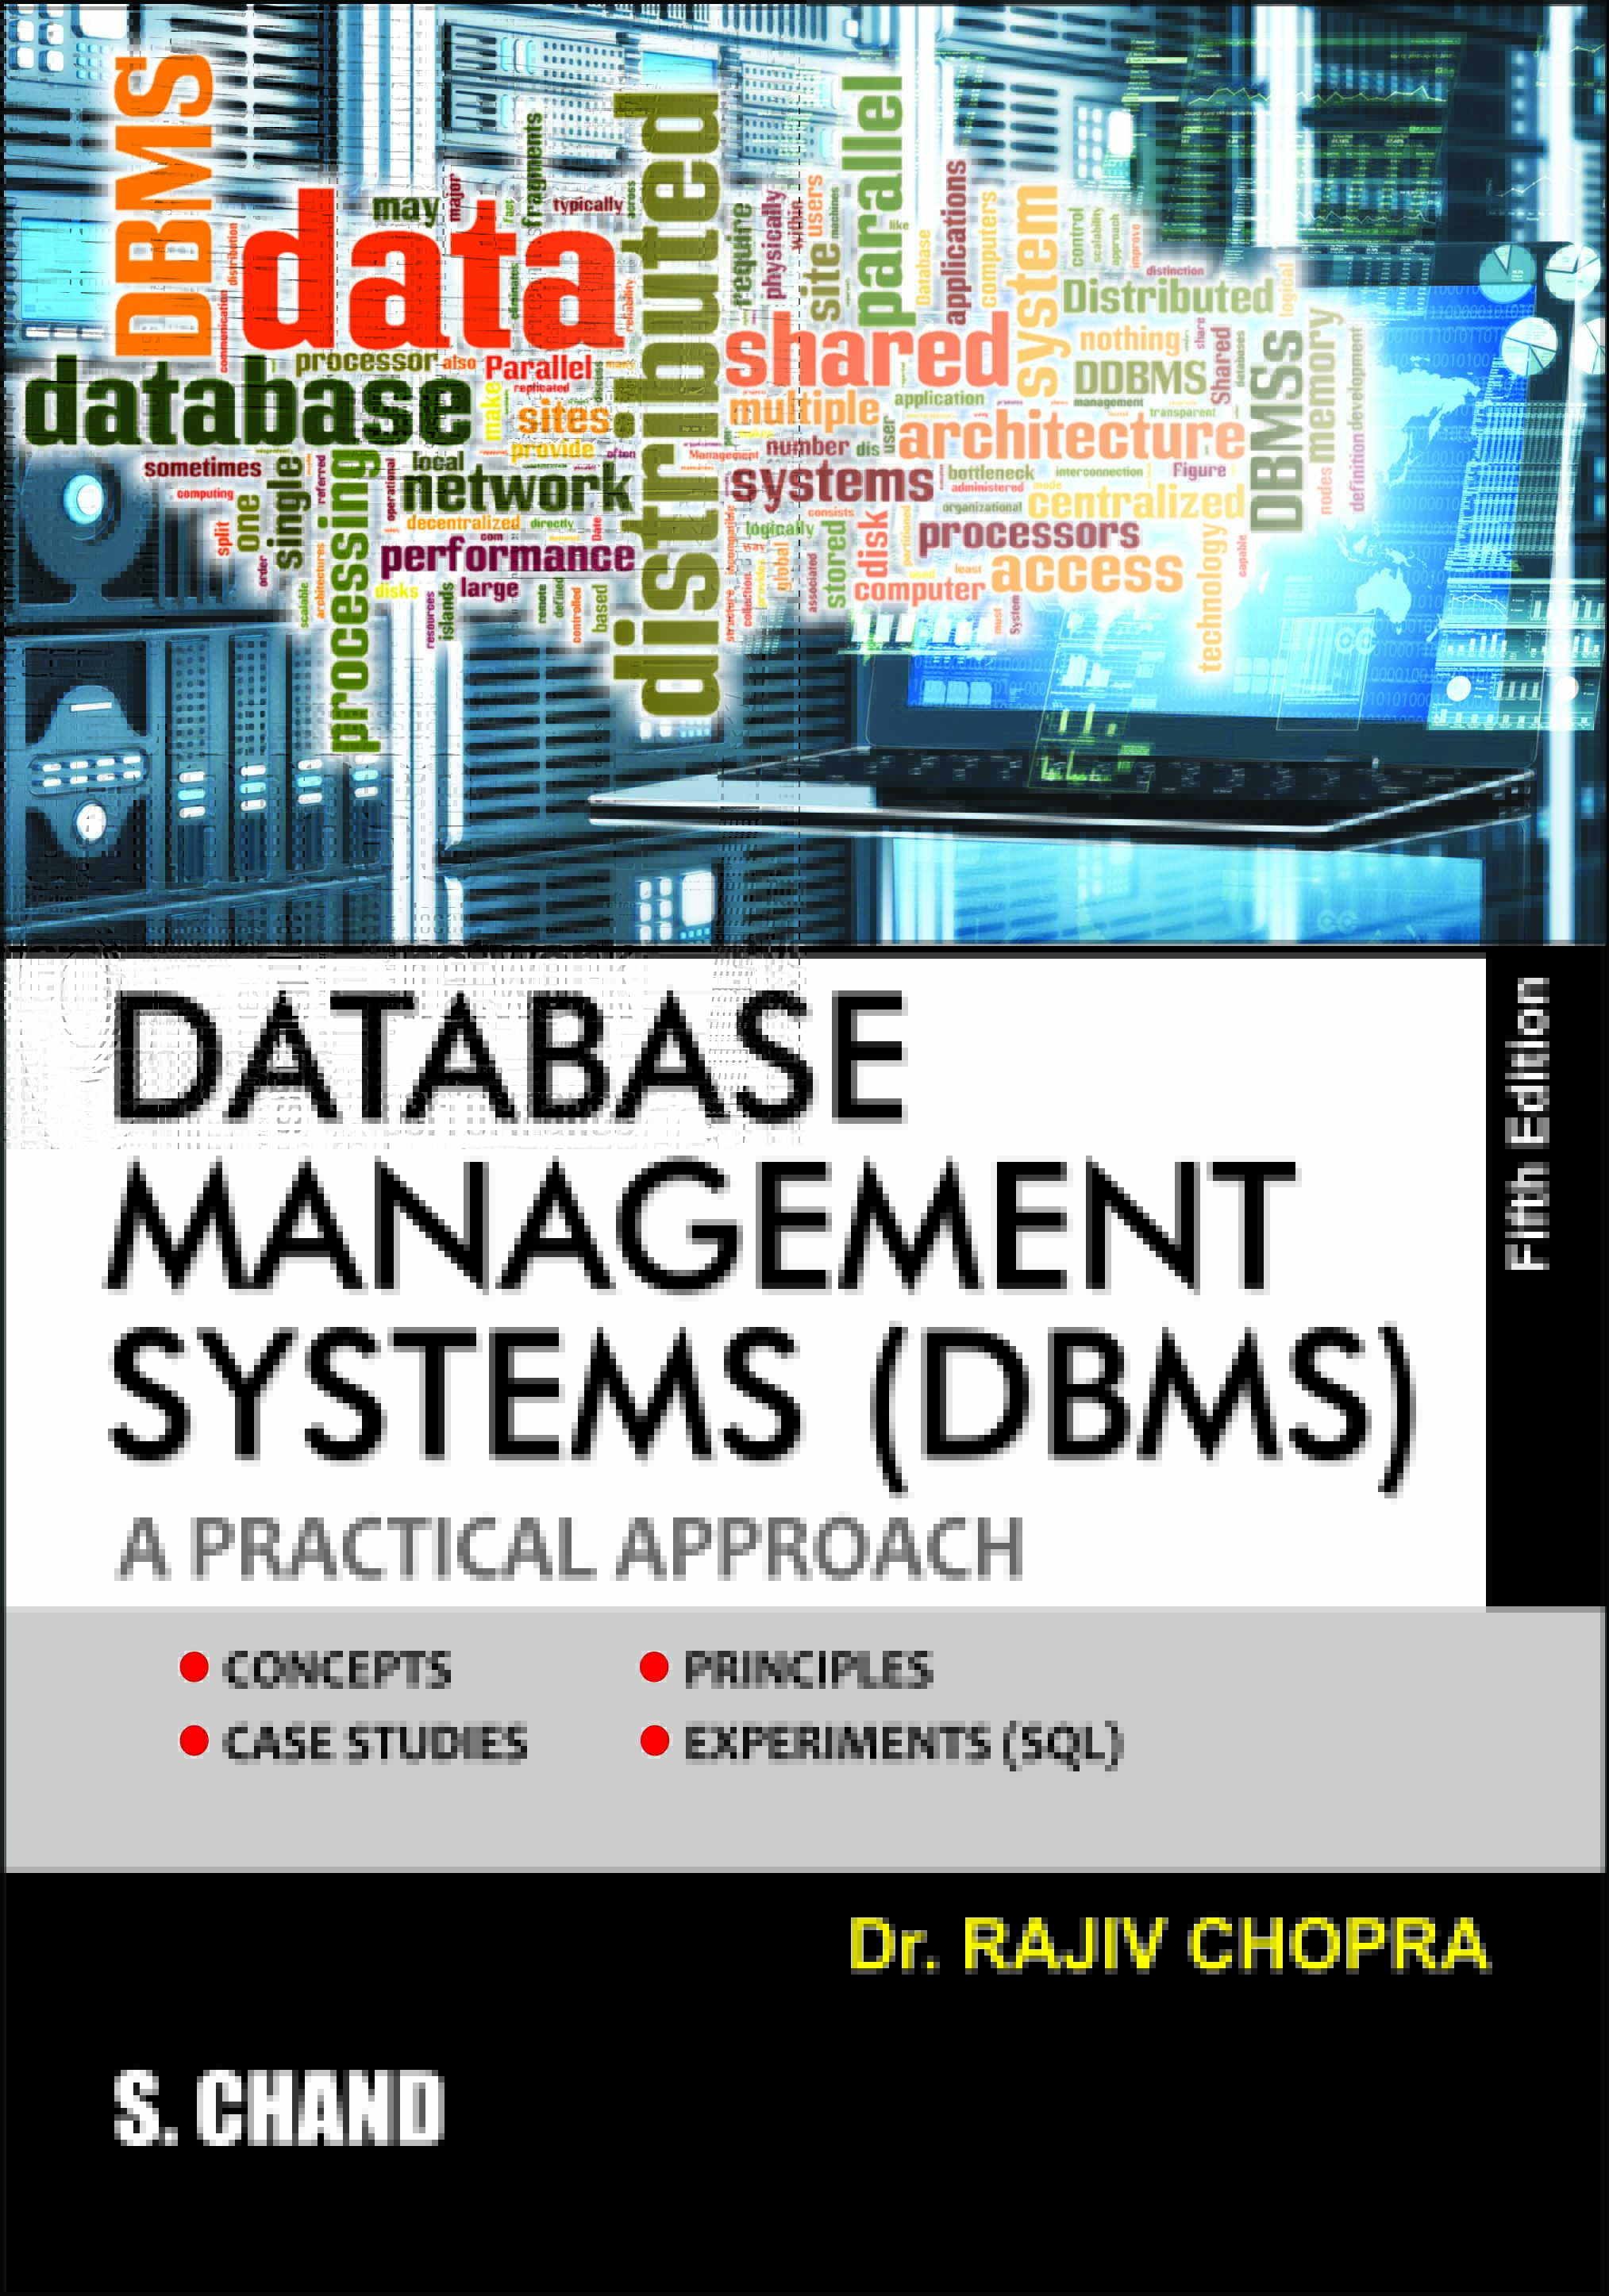 database management system research papers pdf